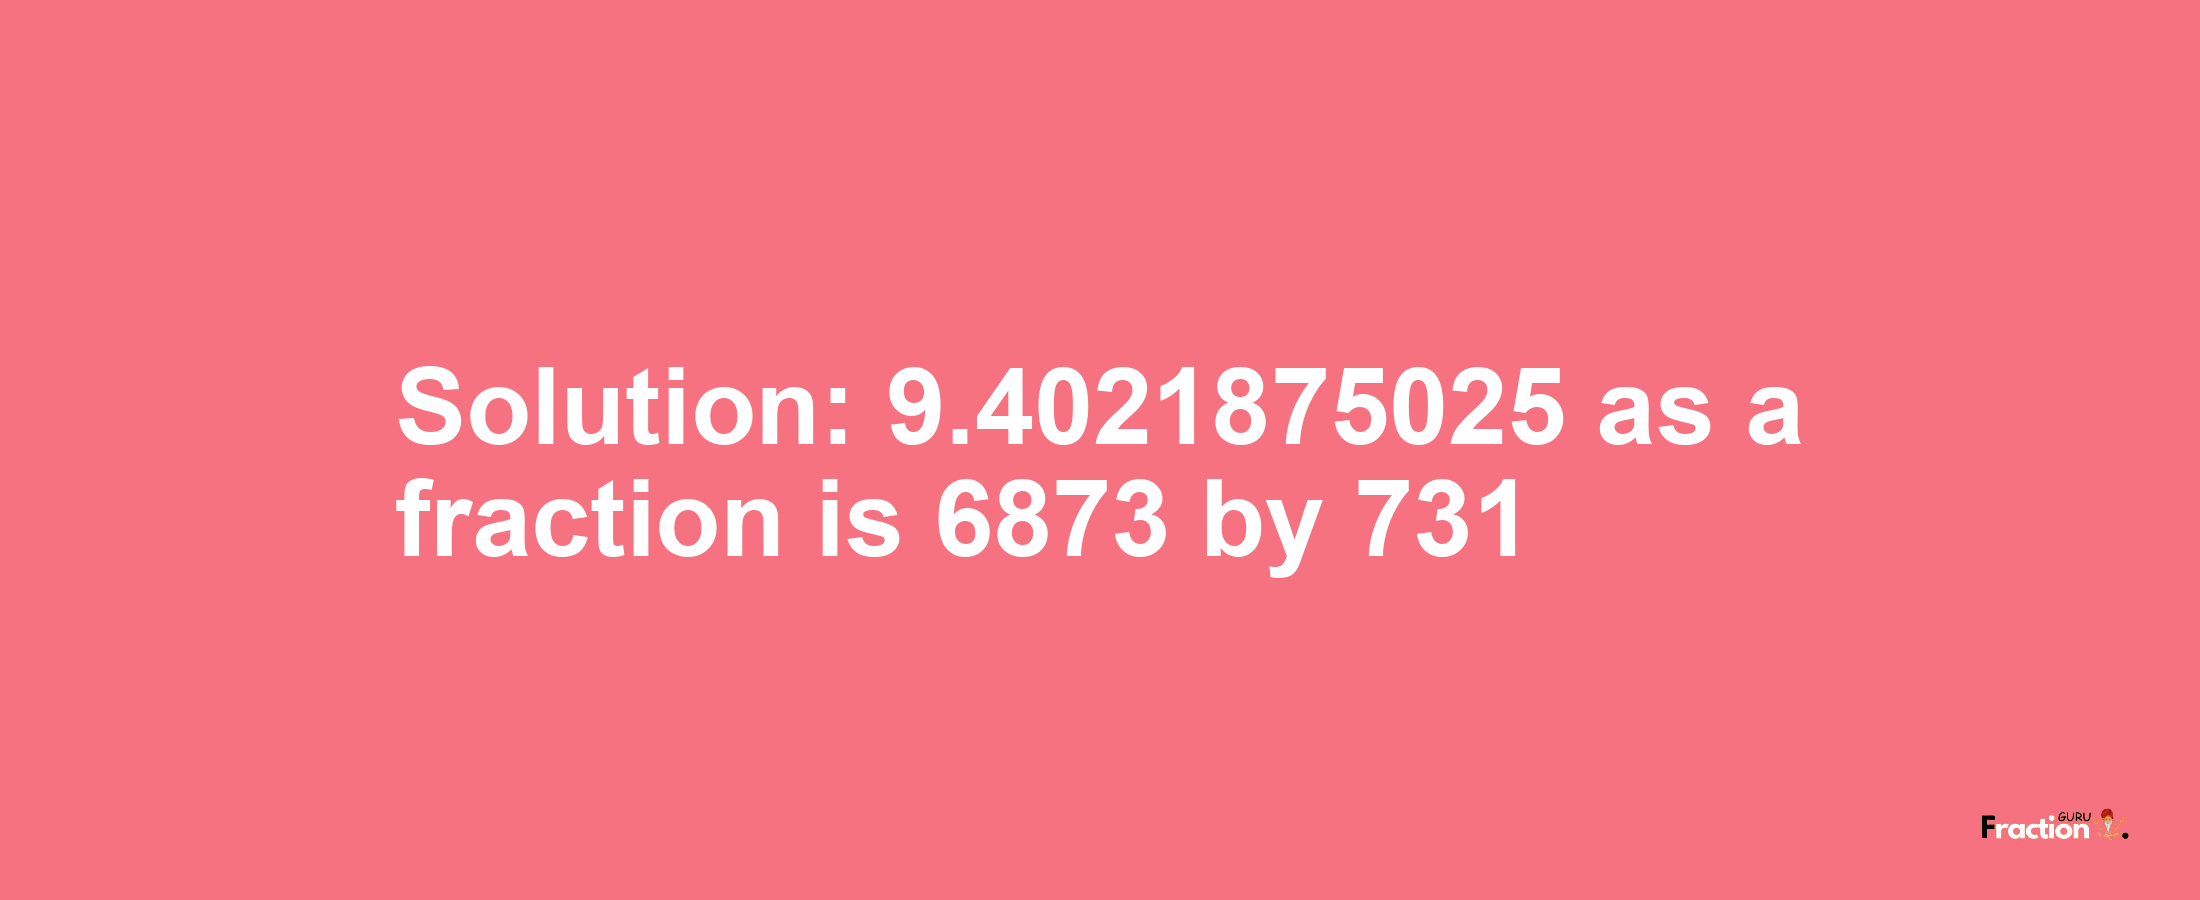 Solution:9.4021875025 as a fraction is 6873/731